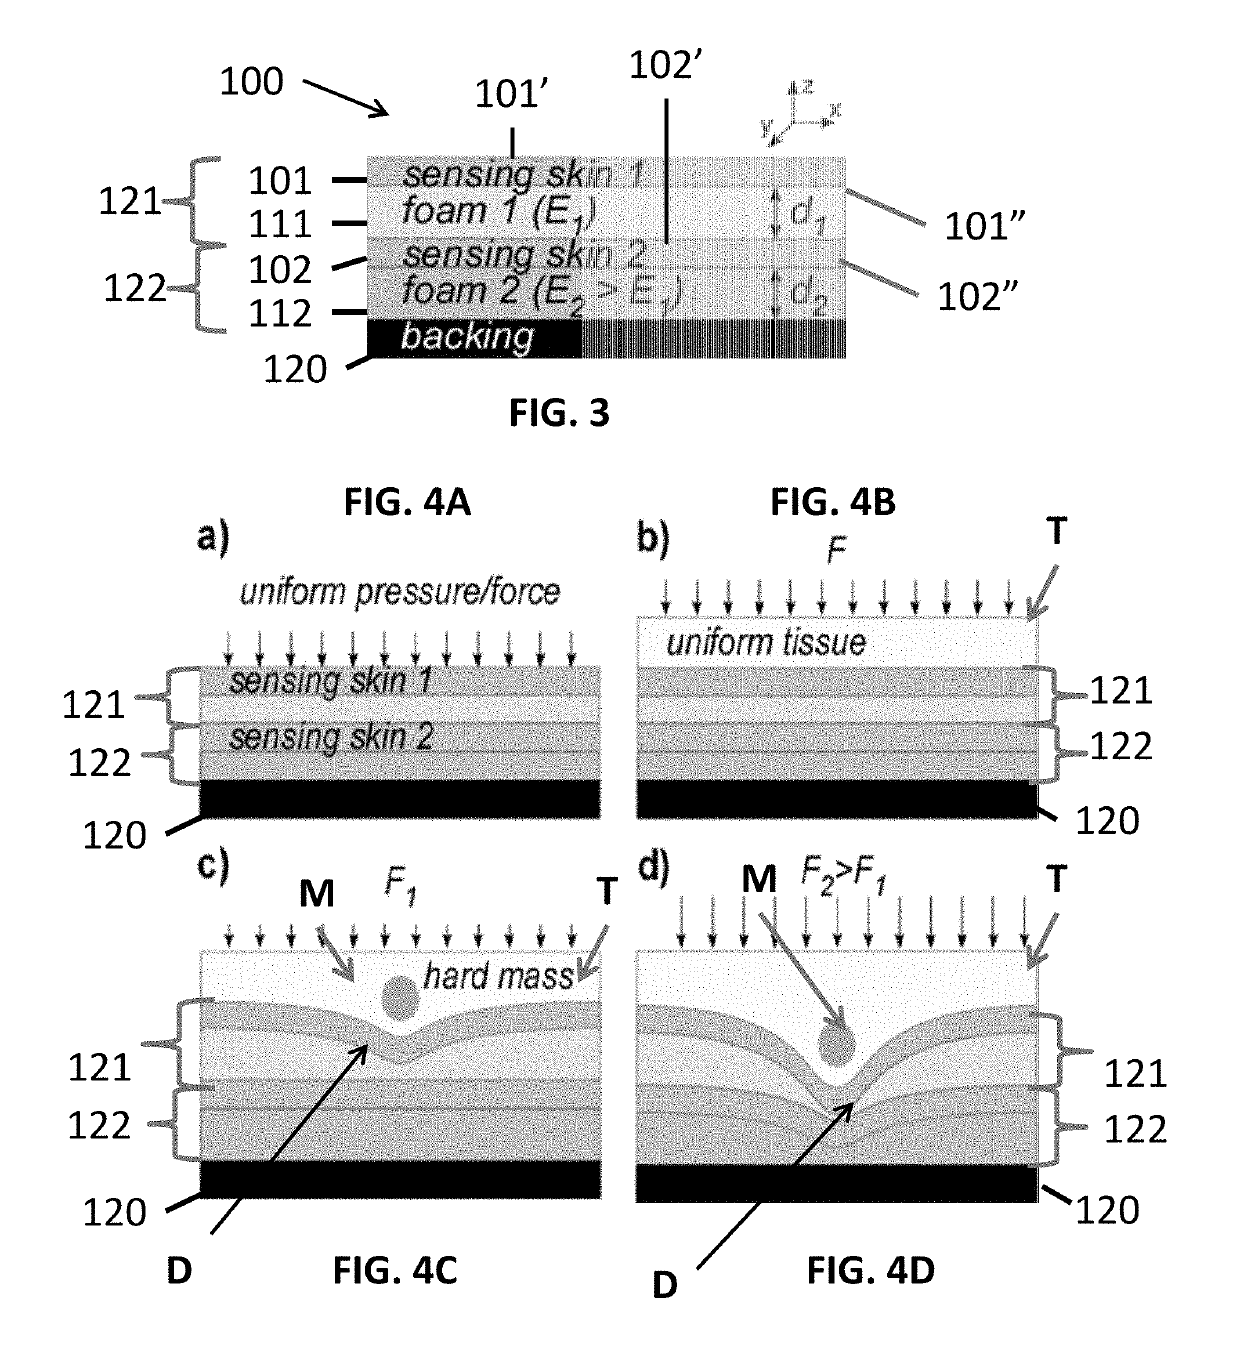 Multi-layer compliant force or pressure sensing system applicable for robotic sensing and anatomical measurements